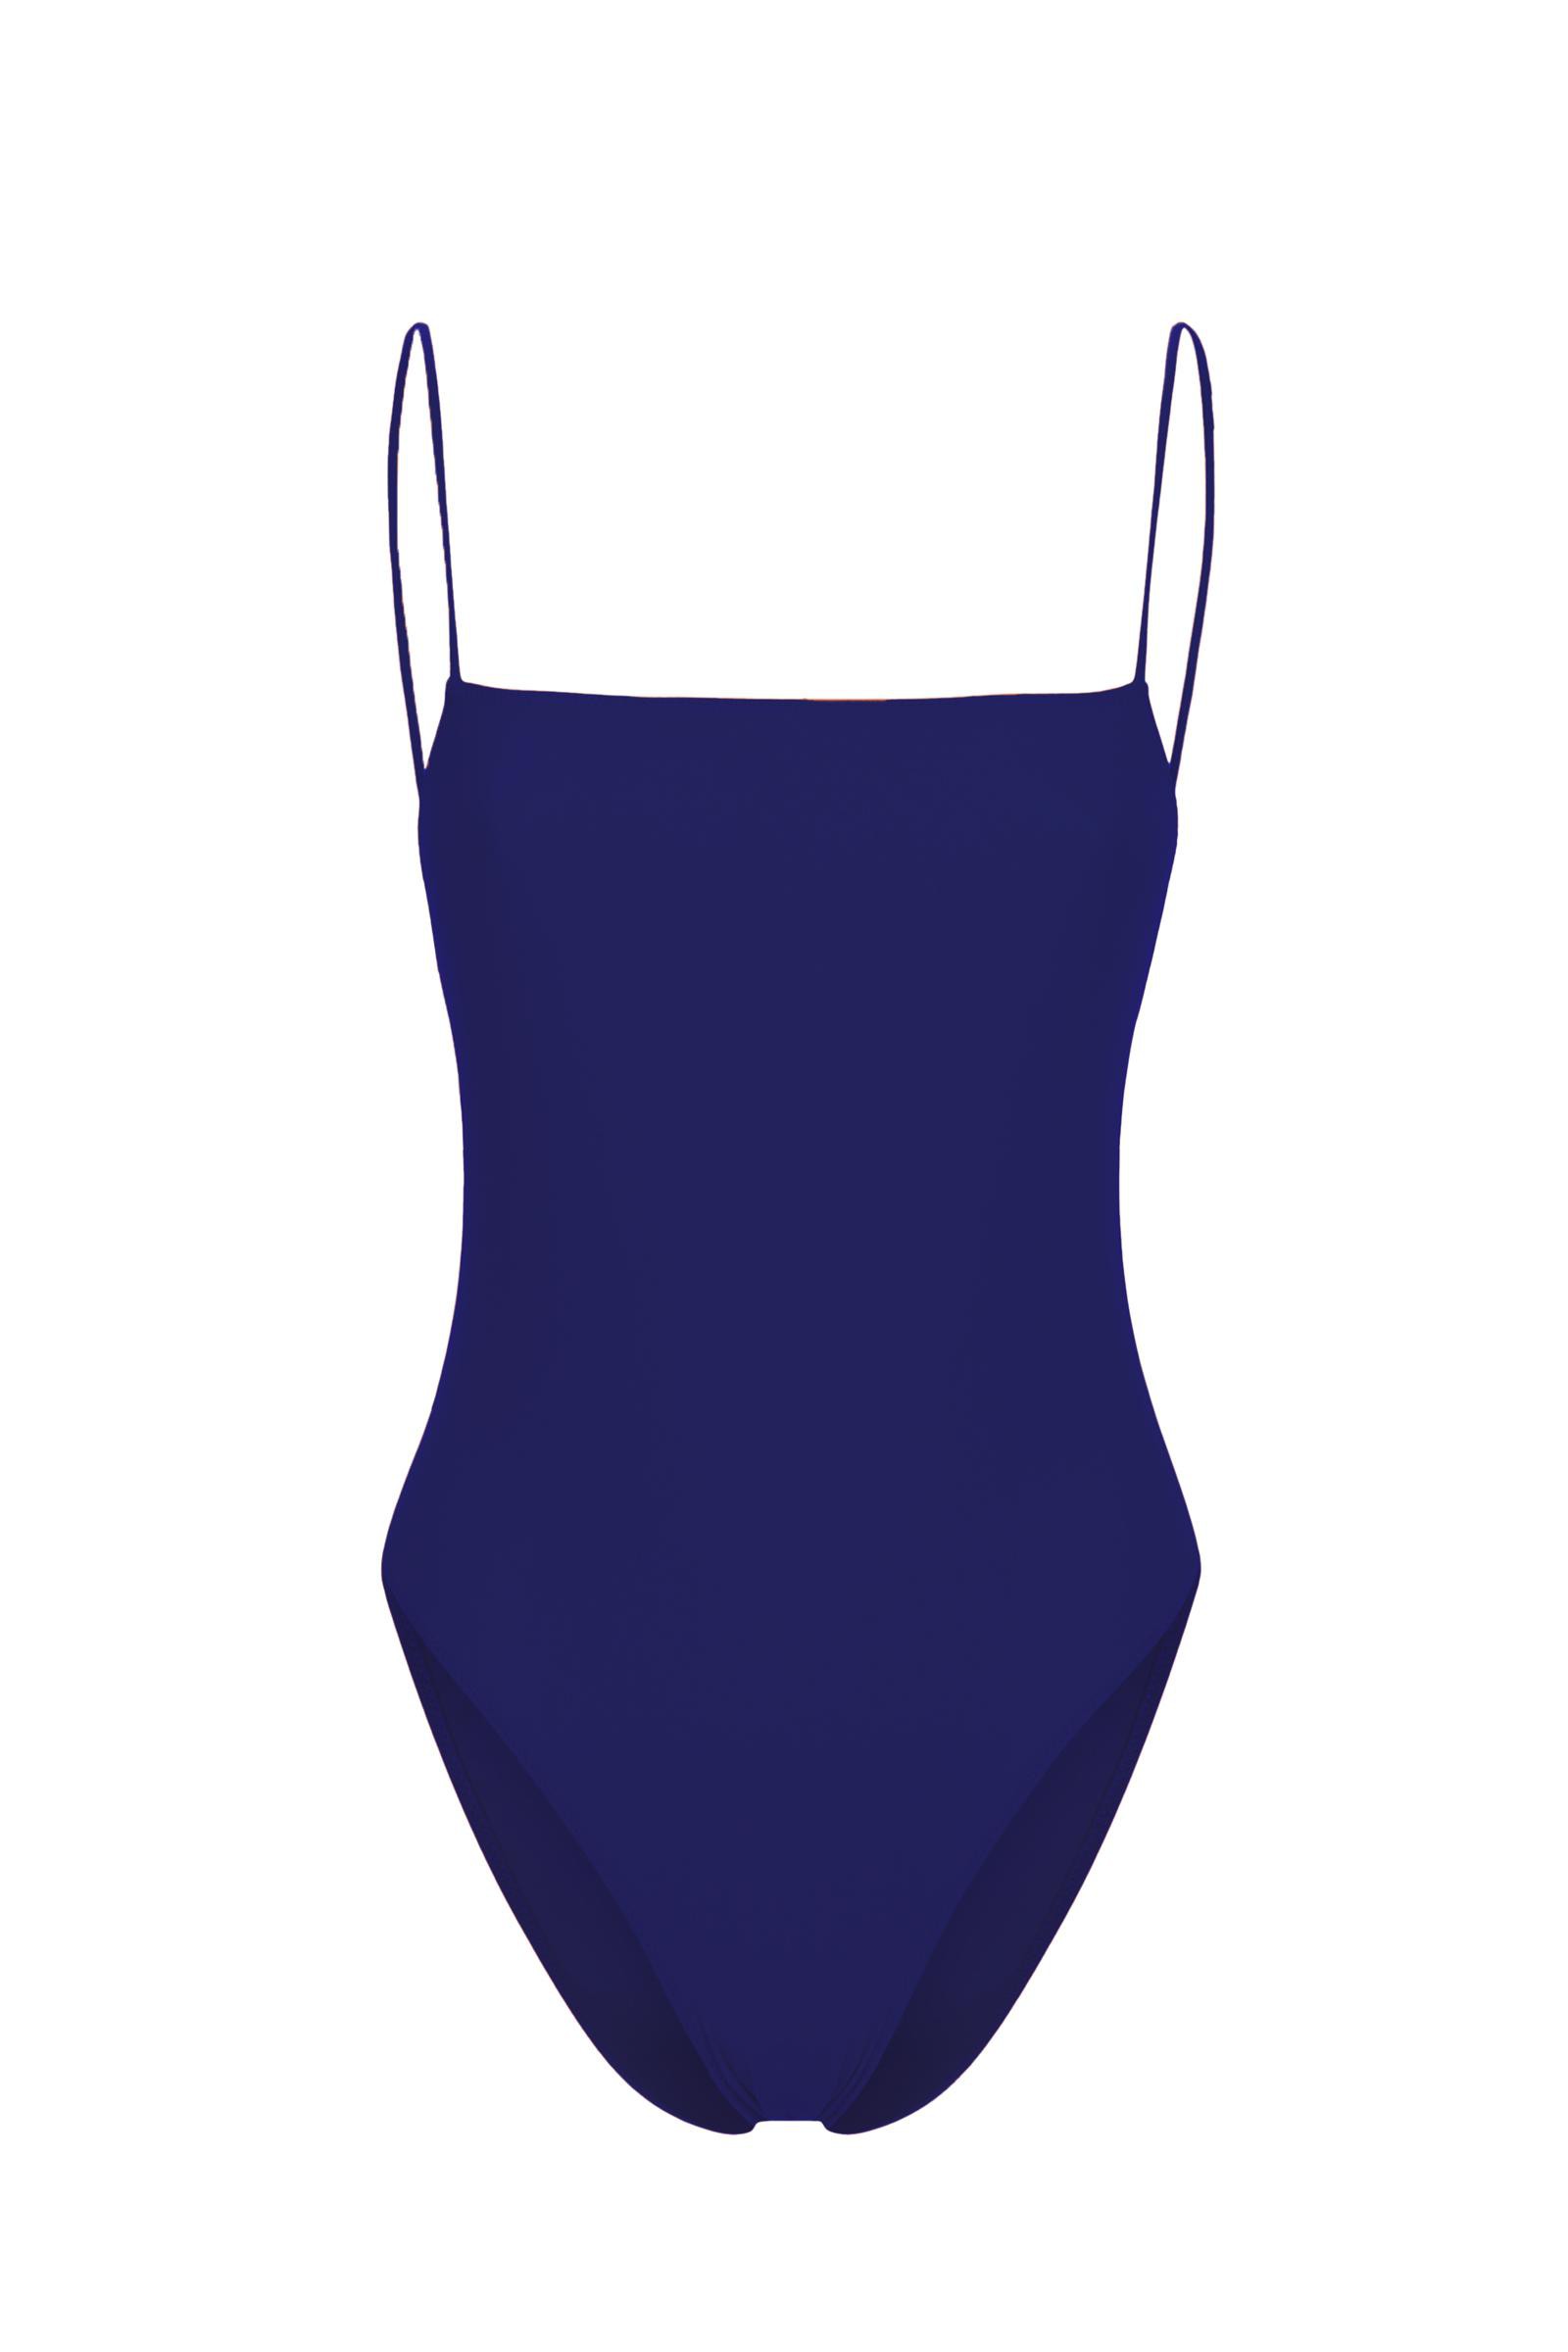 Swimmsuit with narrow shoulder straps